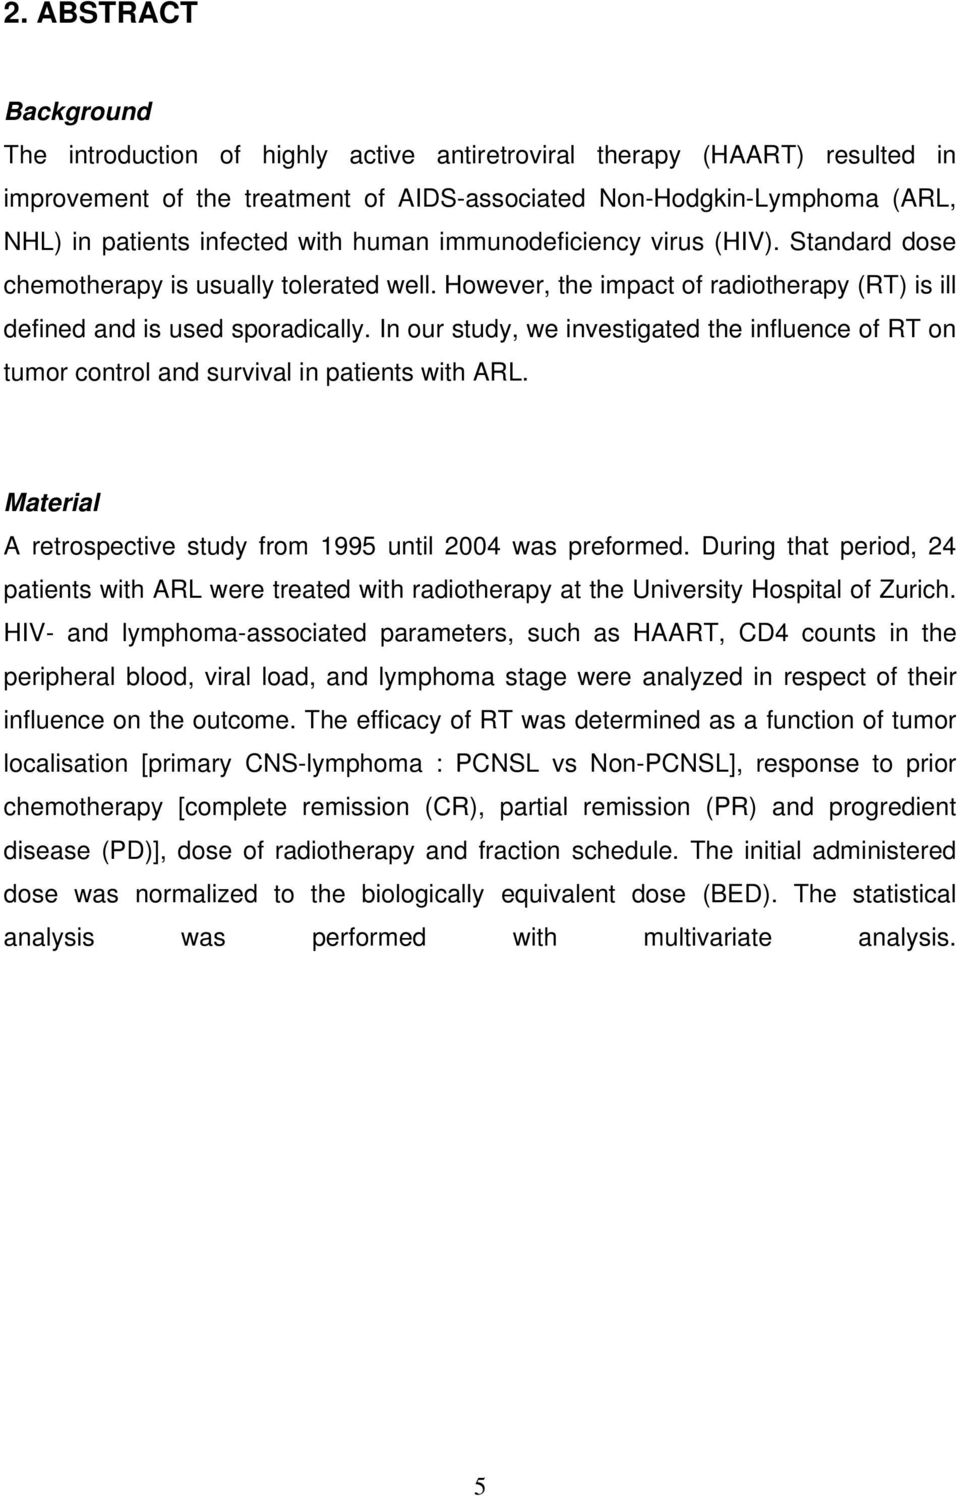 In our study, we investigated the influence of RT on tumor control and survival in patients with ARL. Material A retrospective study from 1995 until 2004 was preformed.